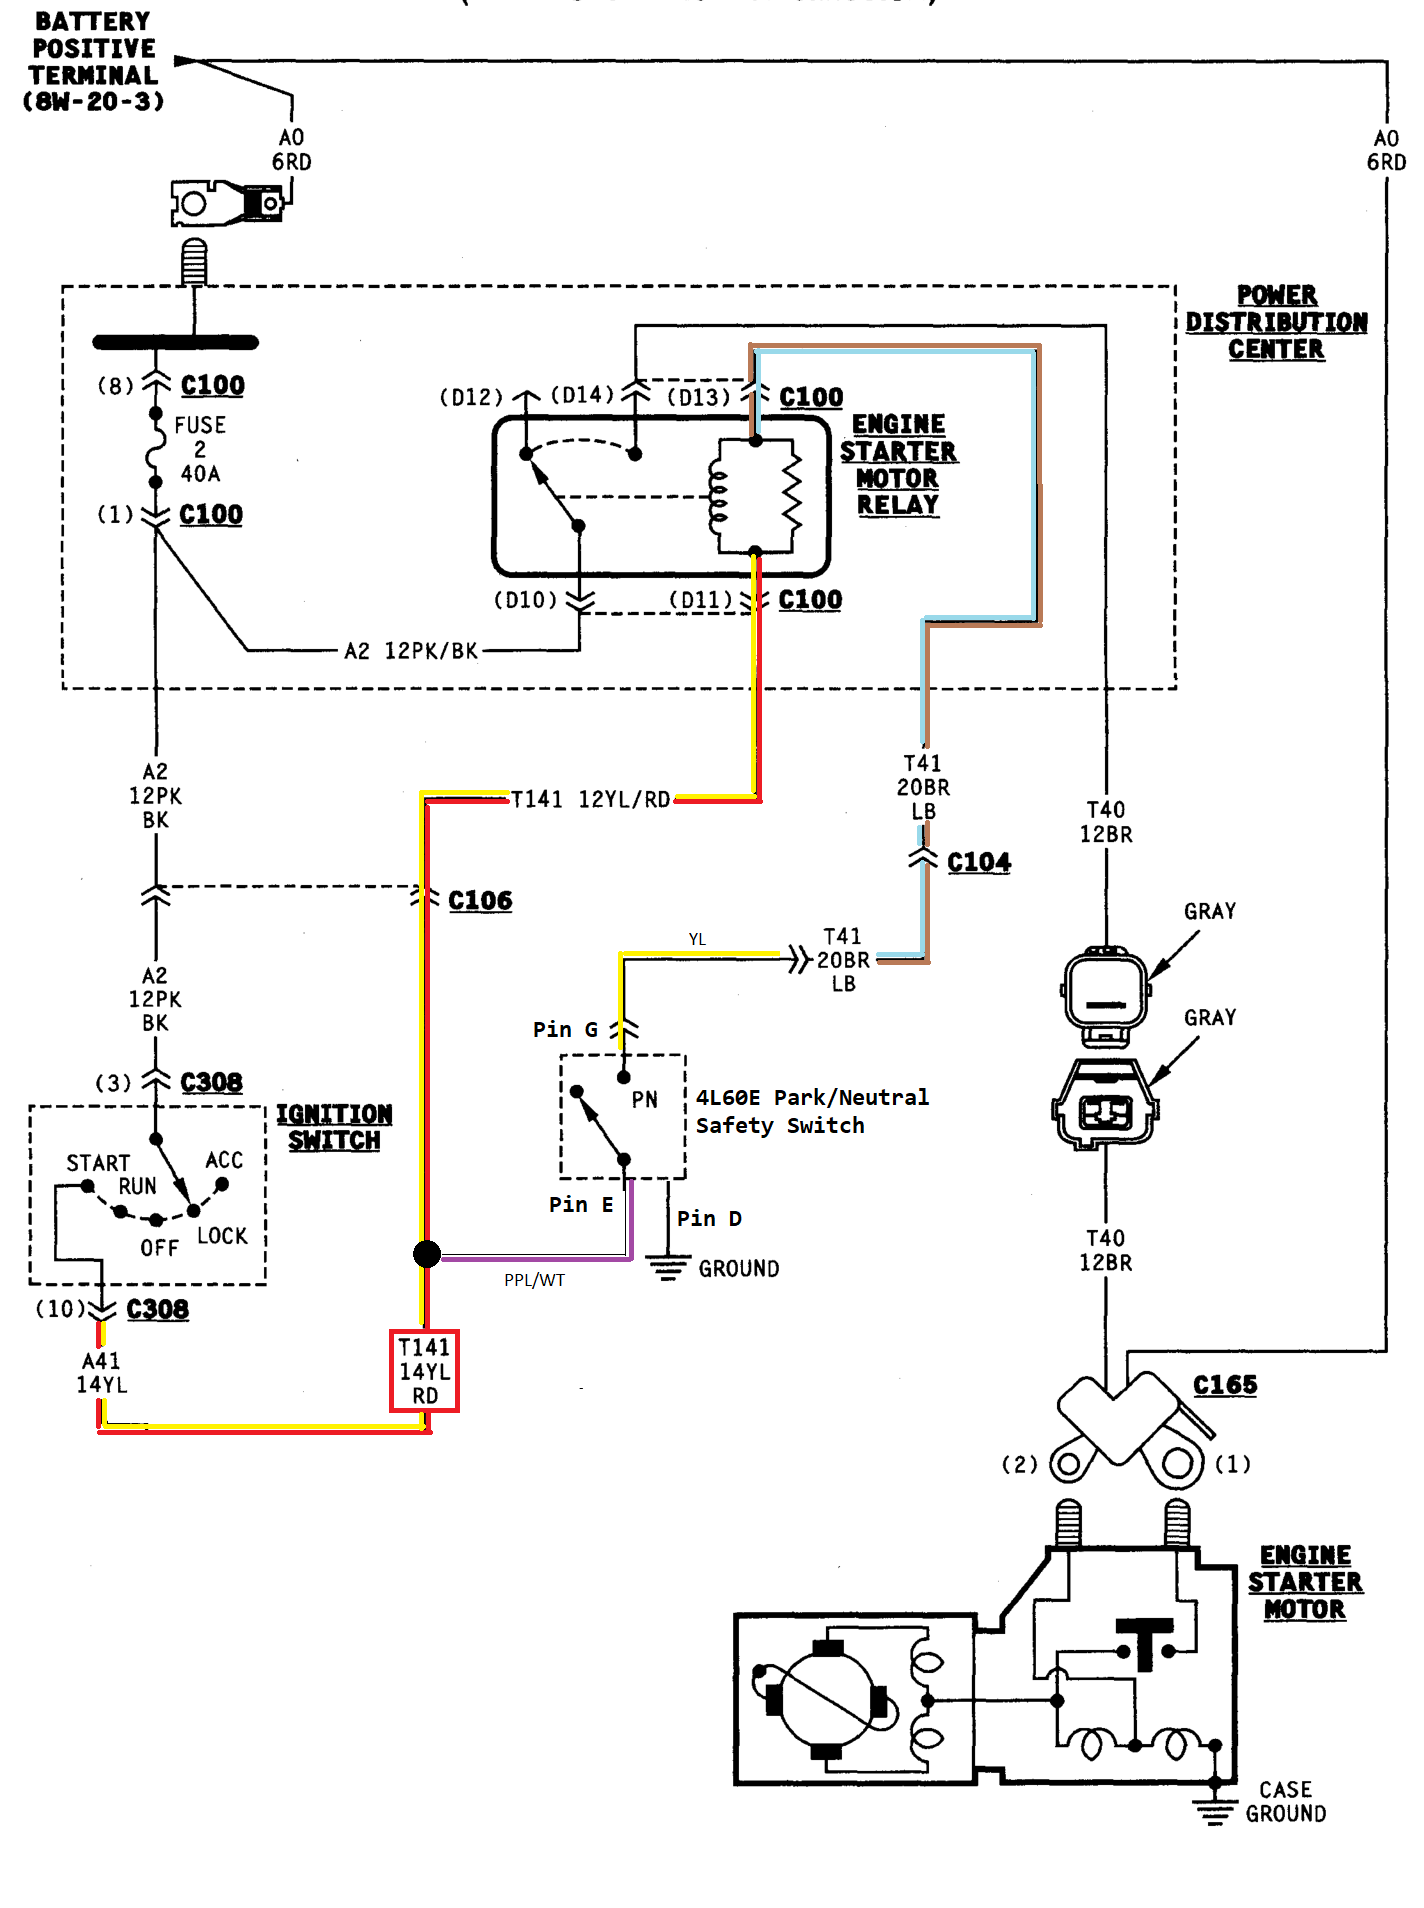 Need PNP (park neutral switch) wiring diagram or pin outs - LS1TECH -  Camaro and Firebird Forum Discussion Way Switch Wiring Diagram LS1Tech.com